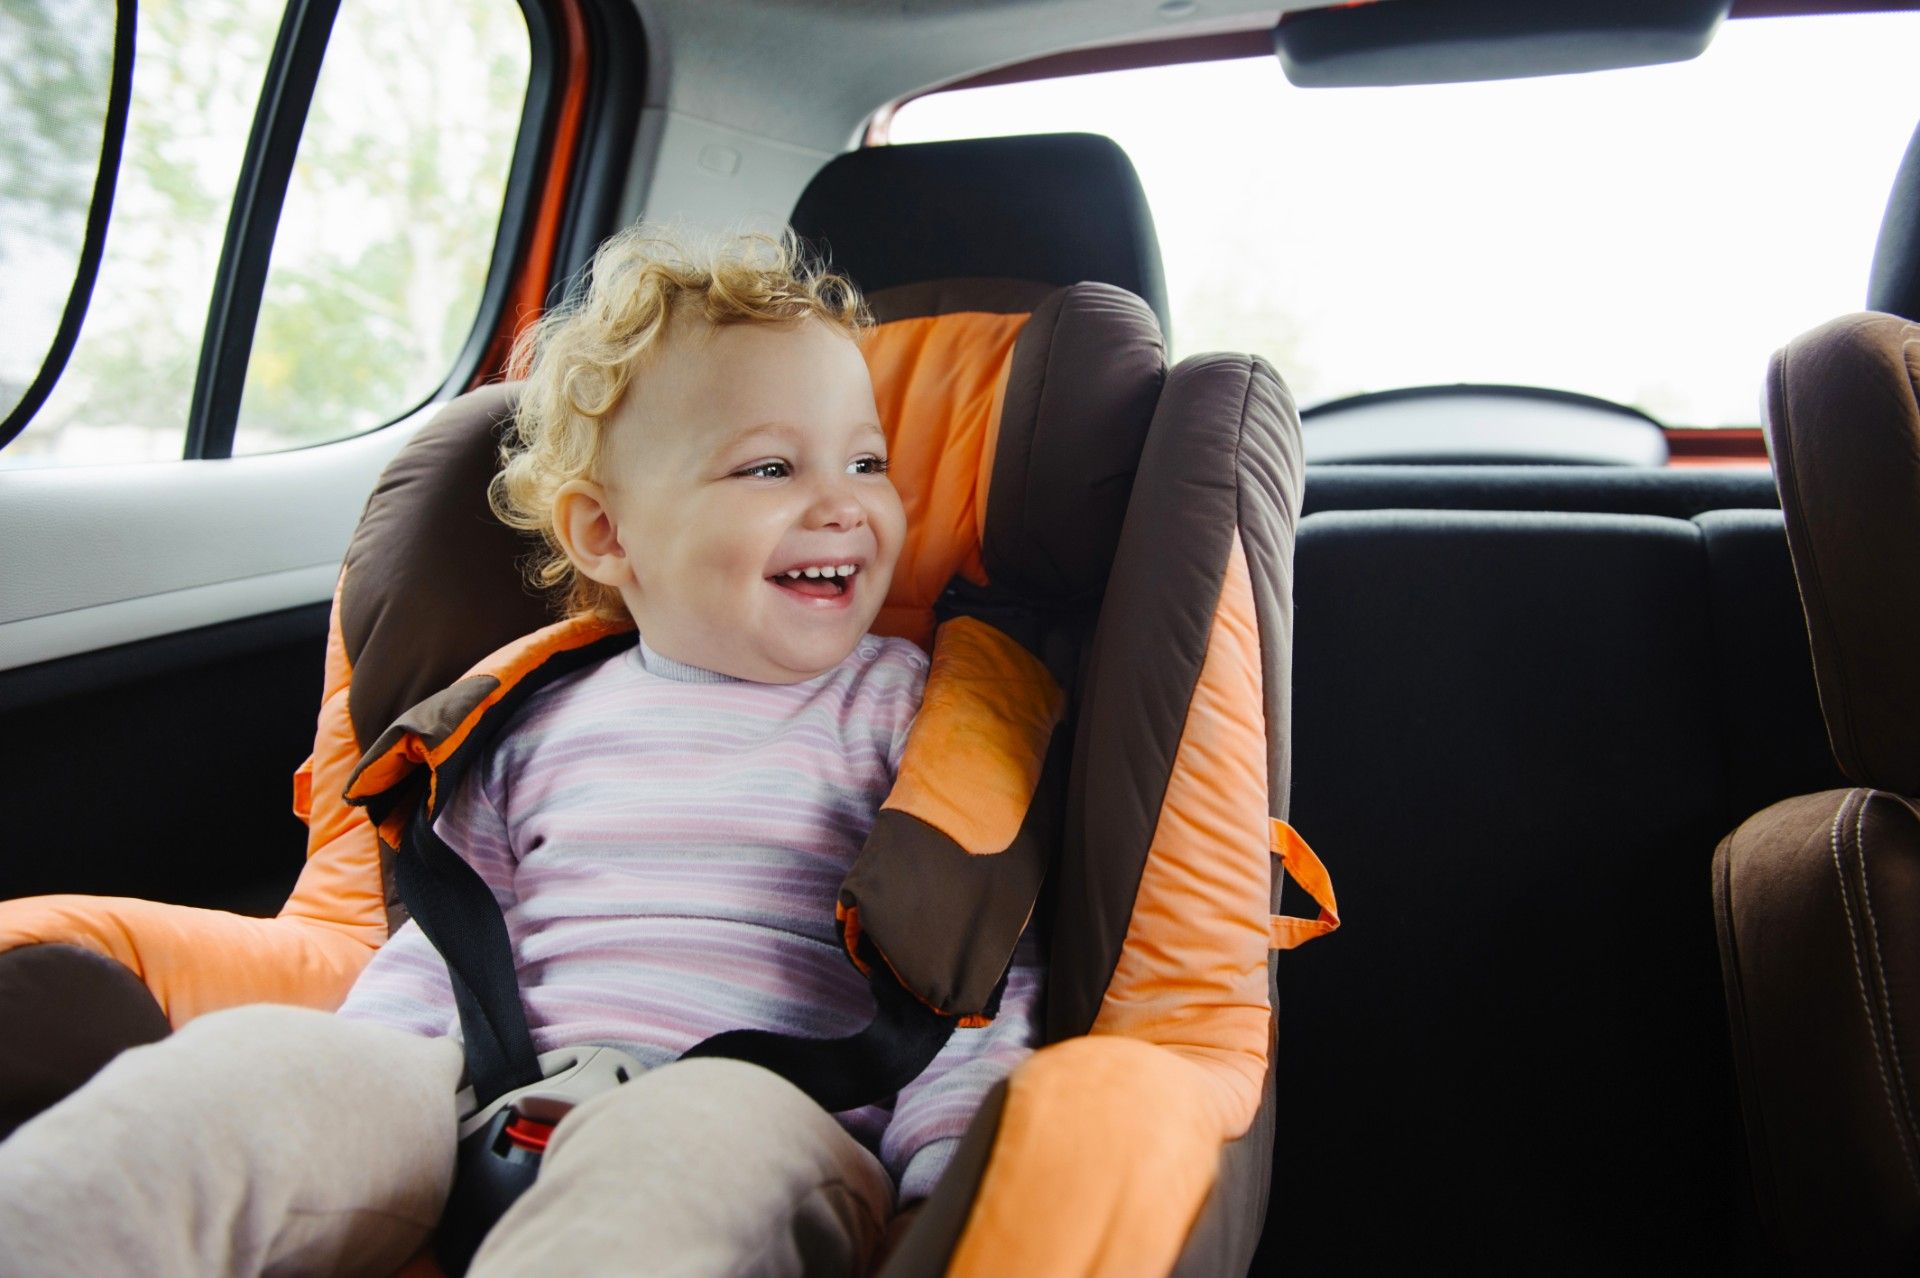 Child with curly hair sits in car seat - rented car seats